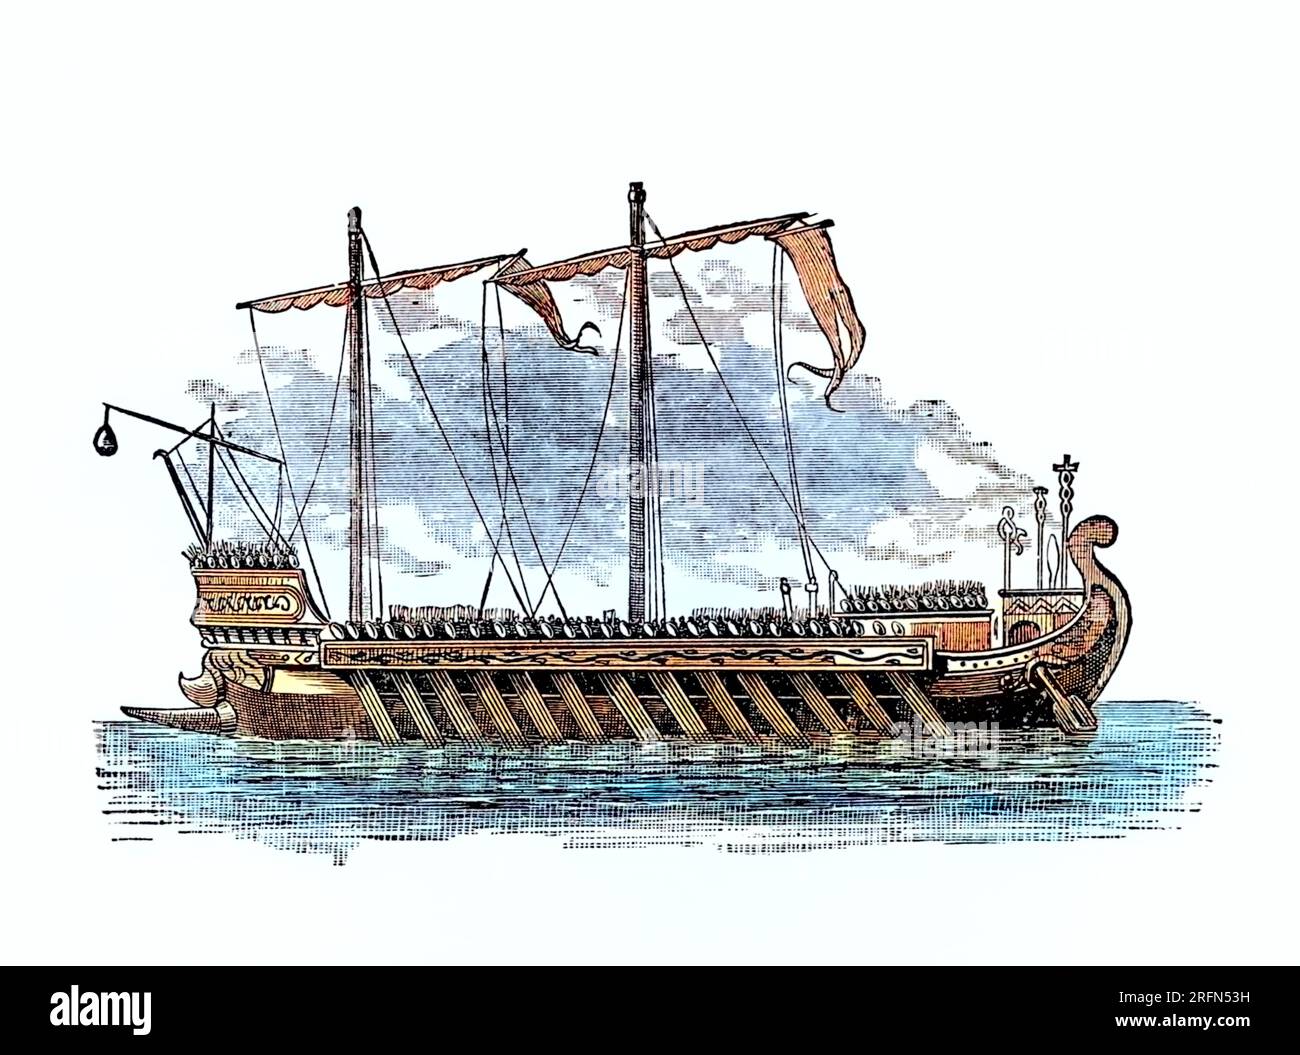 A galley is a rowing propelled ship. It originated among Mediterranean seafaring civilizations in the late second millennium BC. Stock Photo